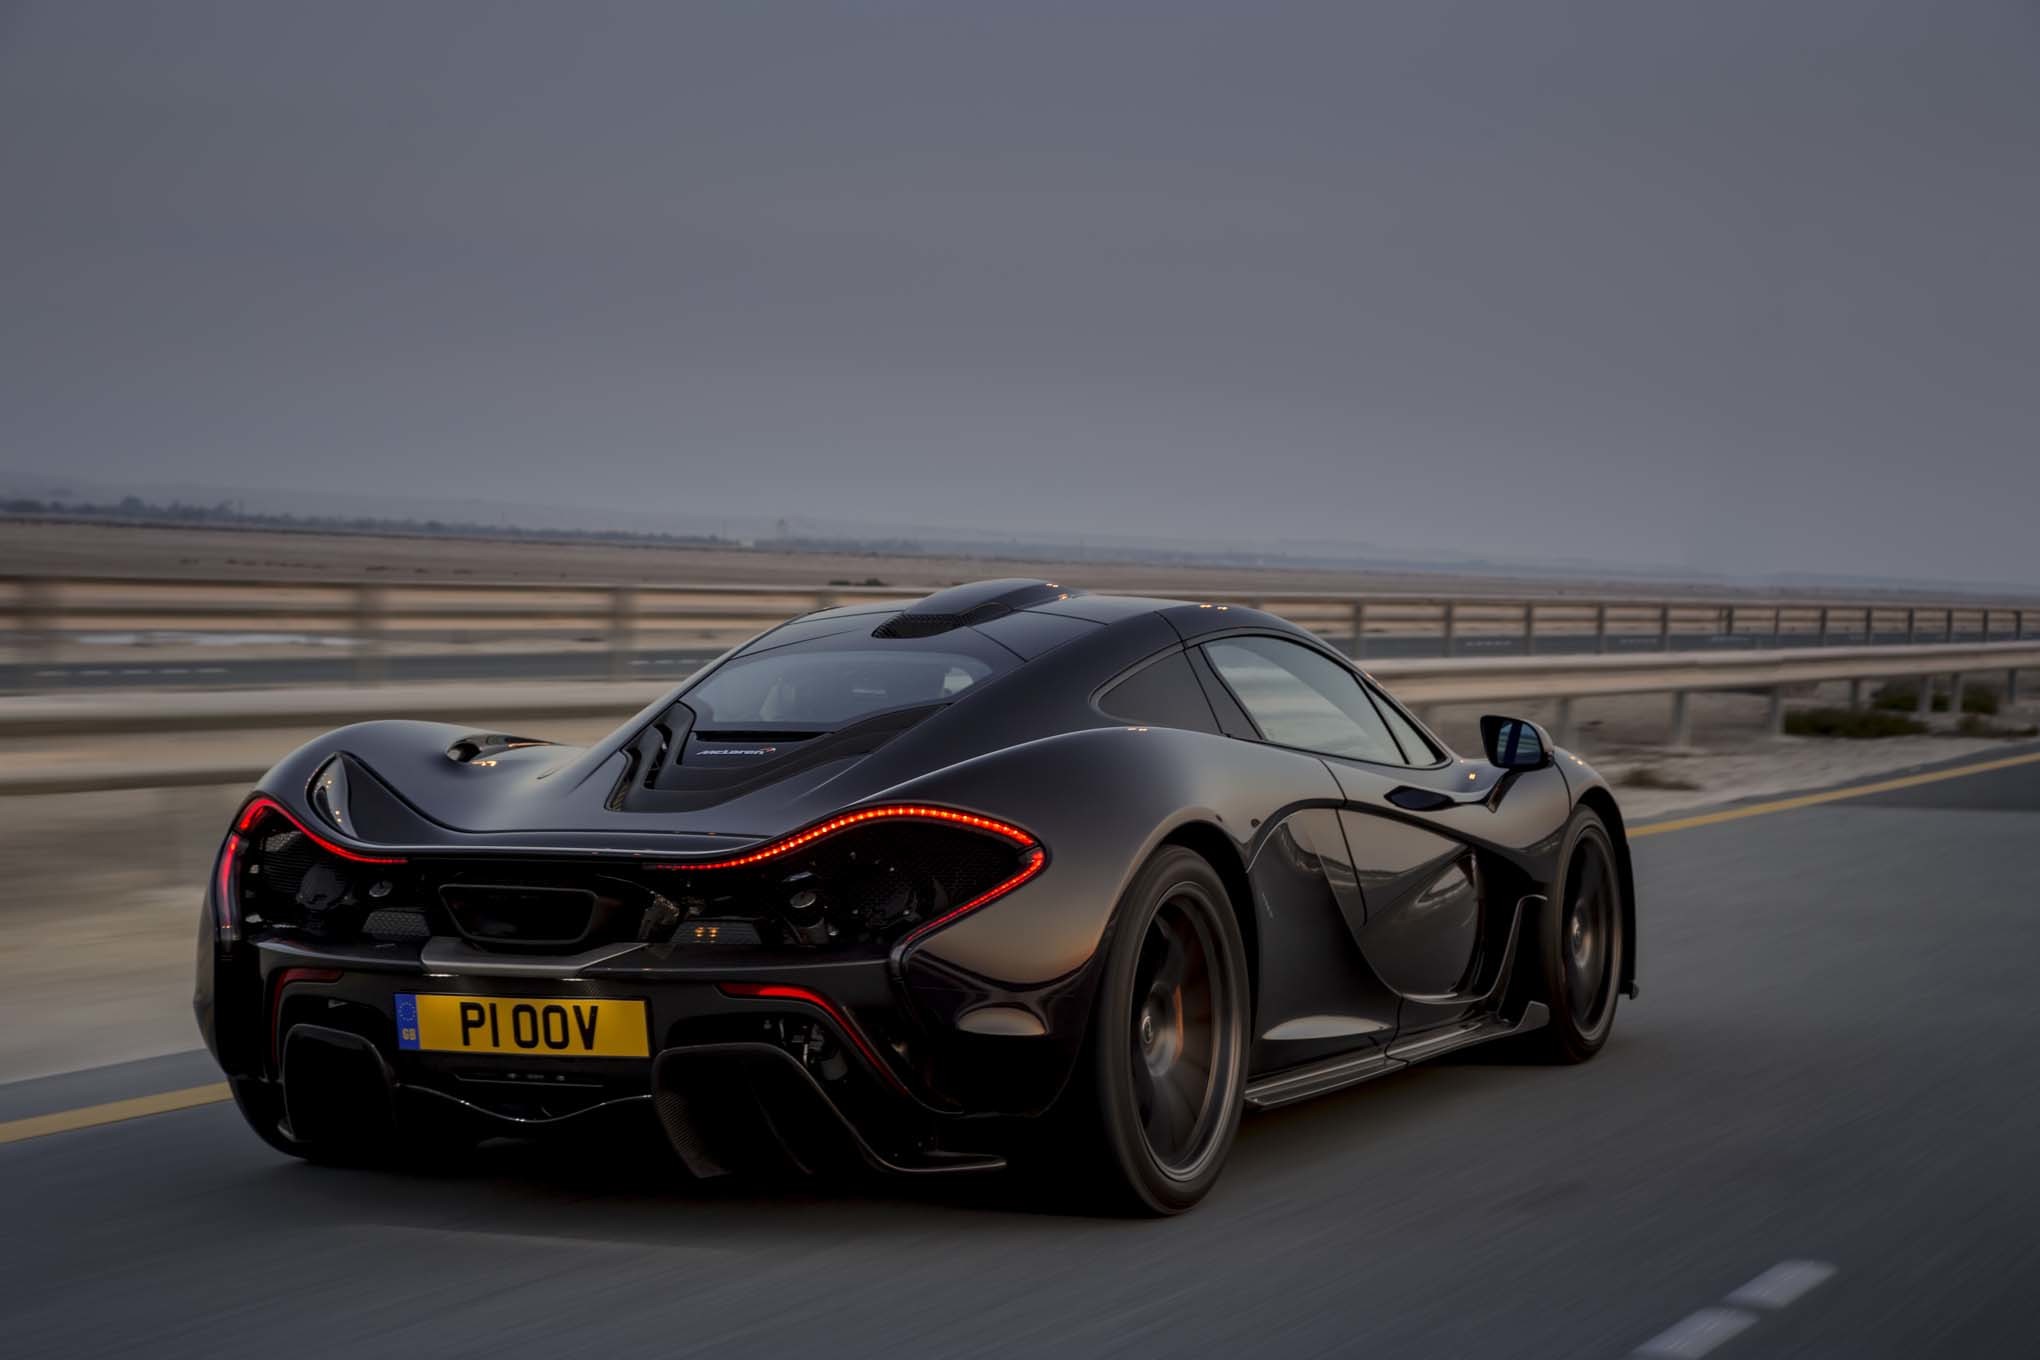 2040x1360 Sports Cars images 2014 McLaren P1 HD wallpaper and background photos